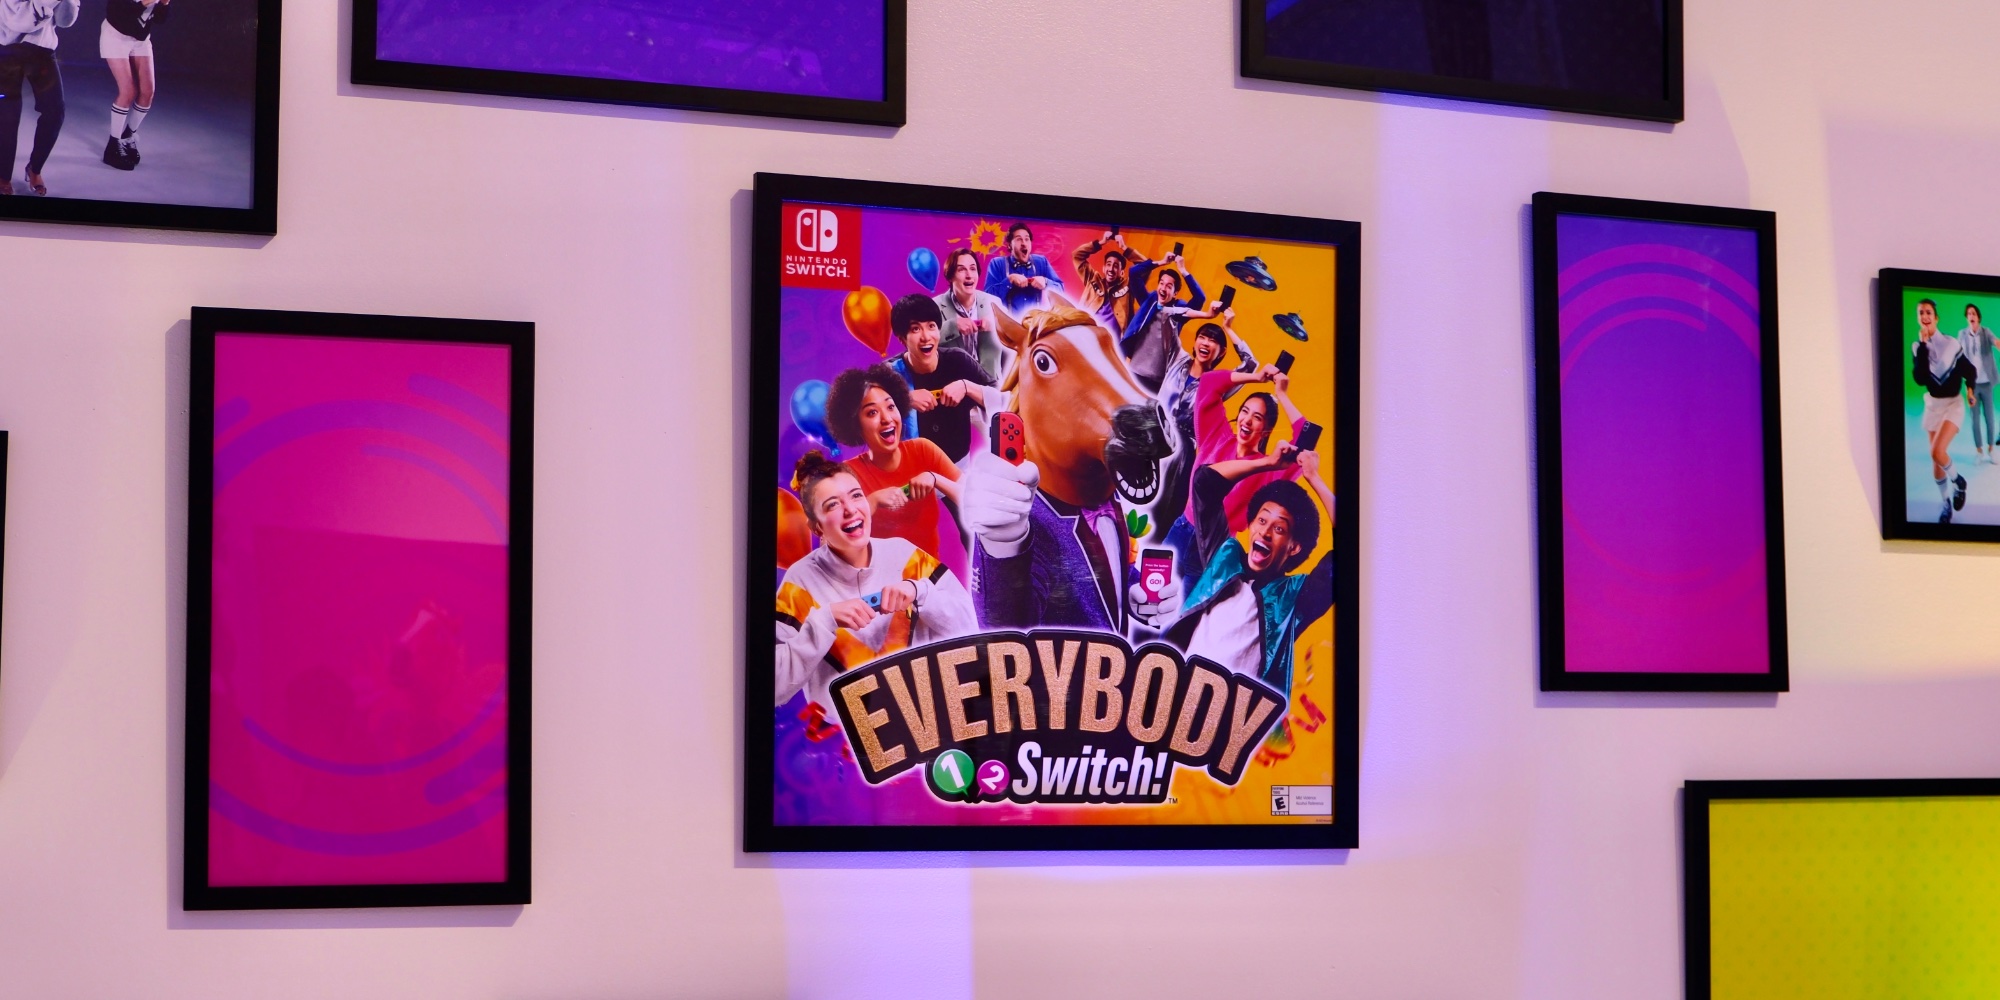 new party impressions game the Switch! 1-2 on first Everybody